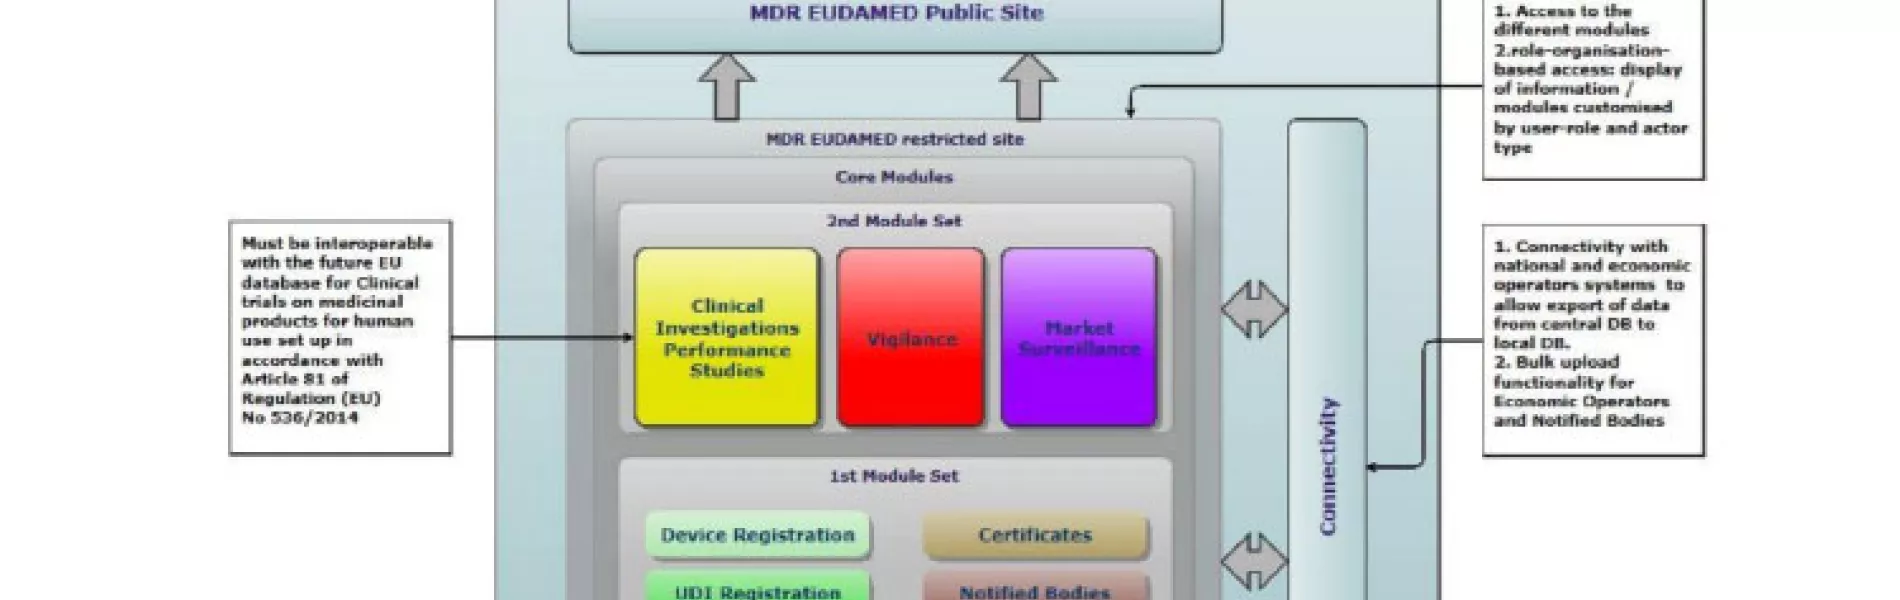 Medical Device UDI Components Management in the European Union